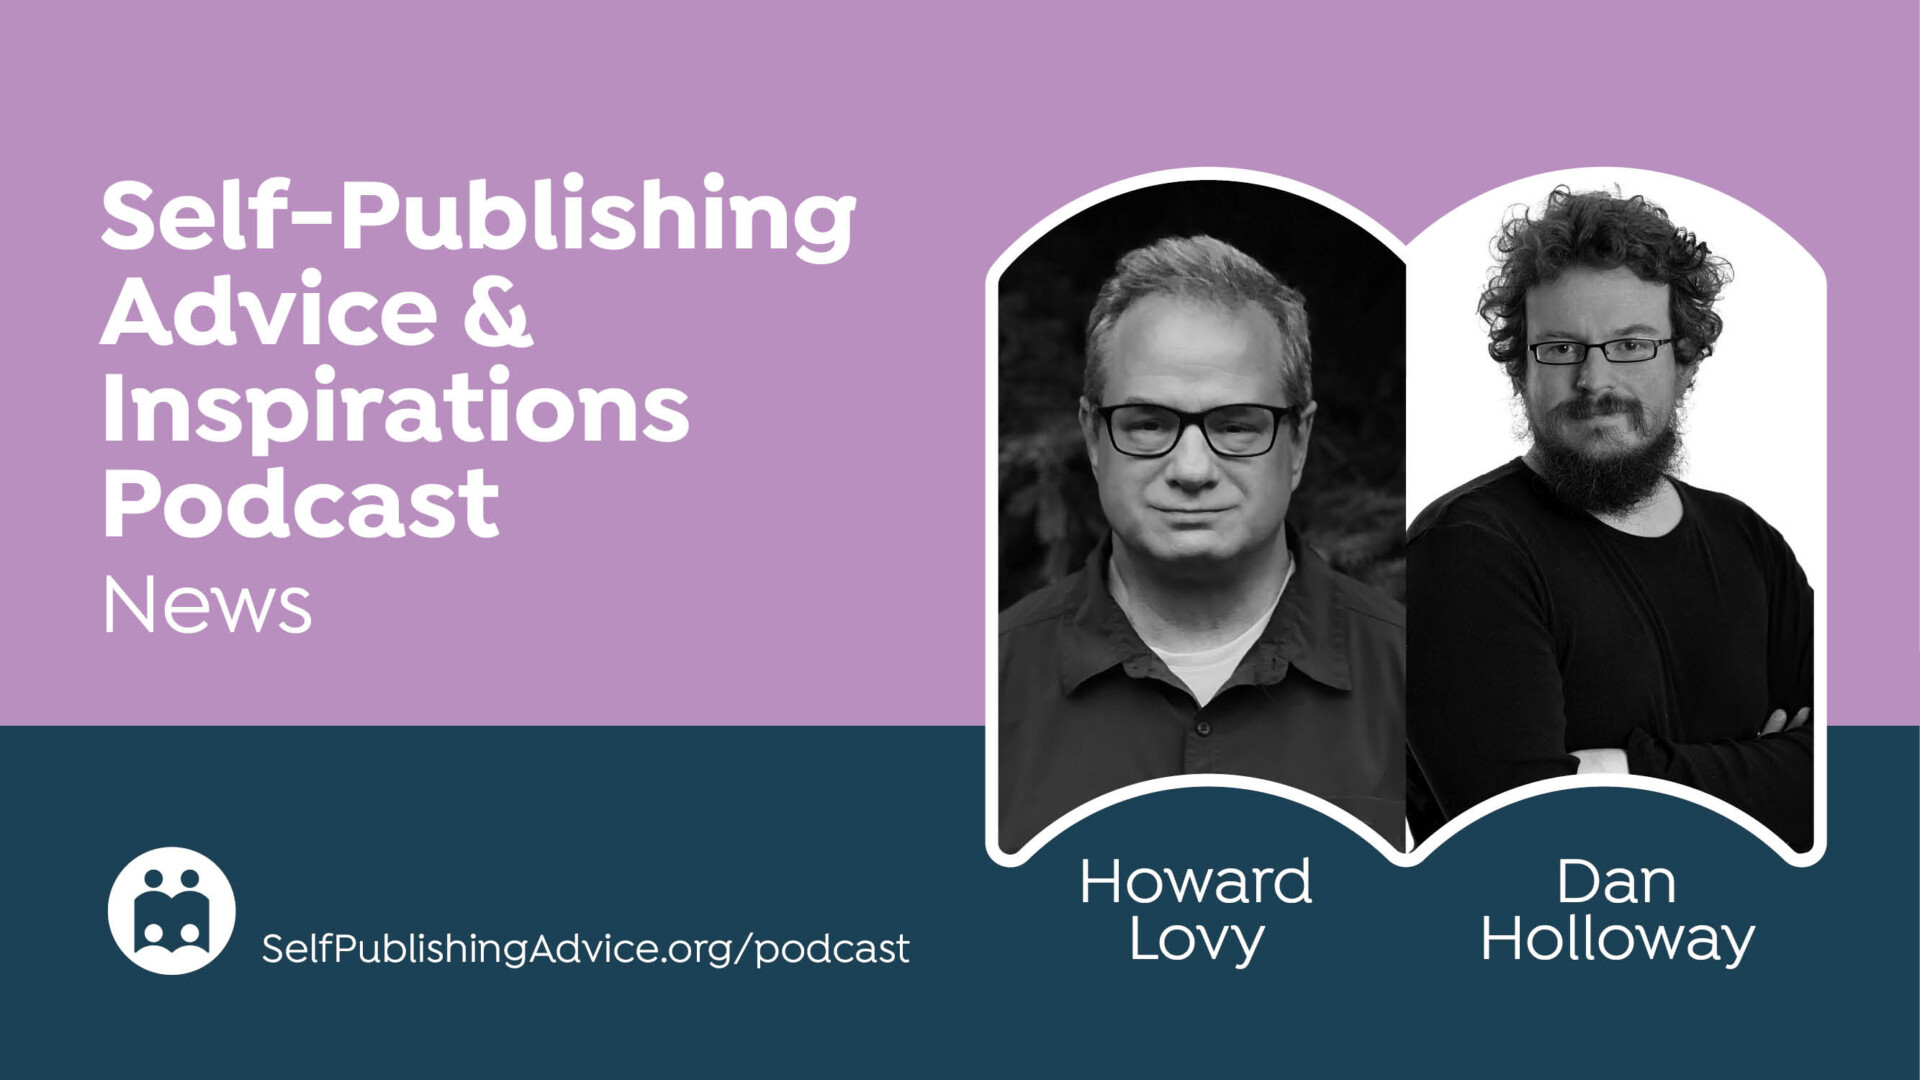 Should Indie Authors Exit Twitter? Judge Says No To S&S, PRH Merger: Self-Publishing News Podcast With Dan Holloway And Howard Lovy